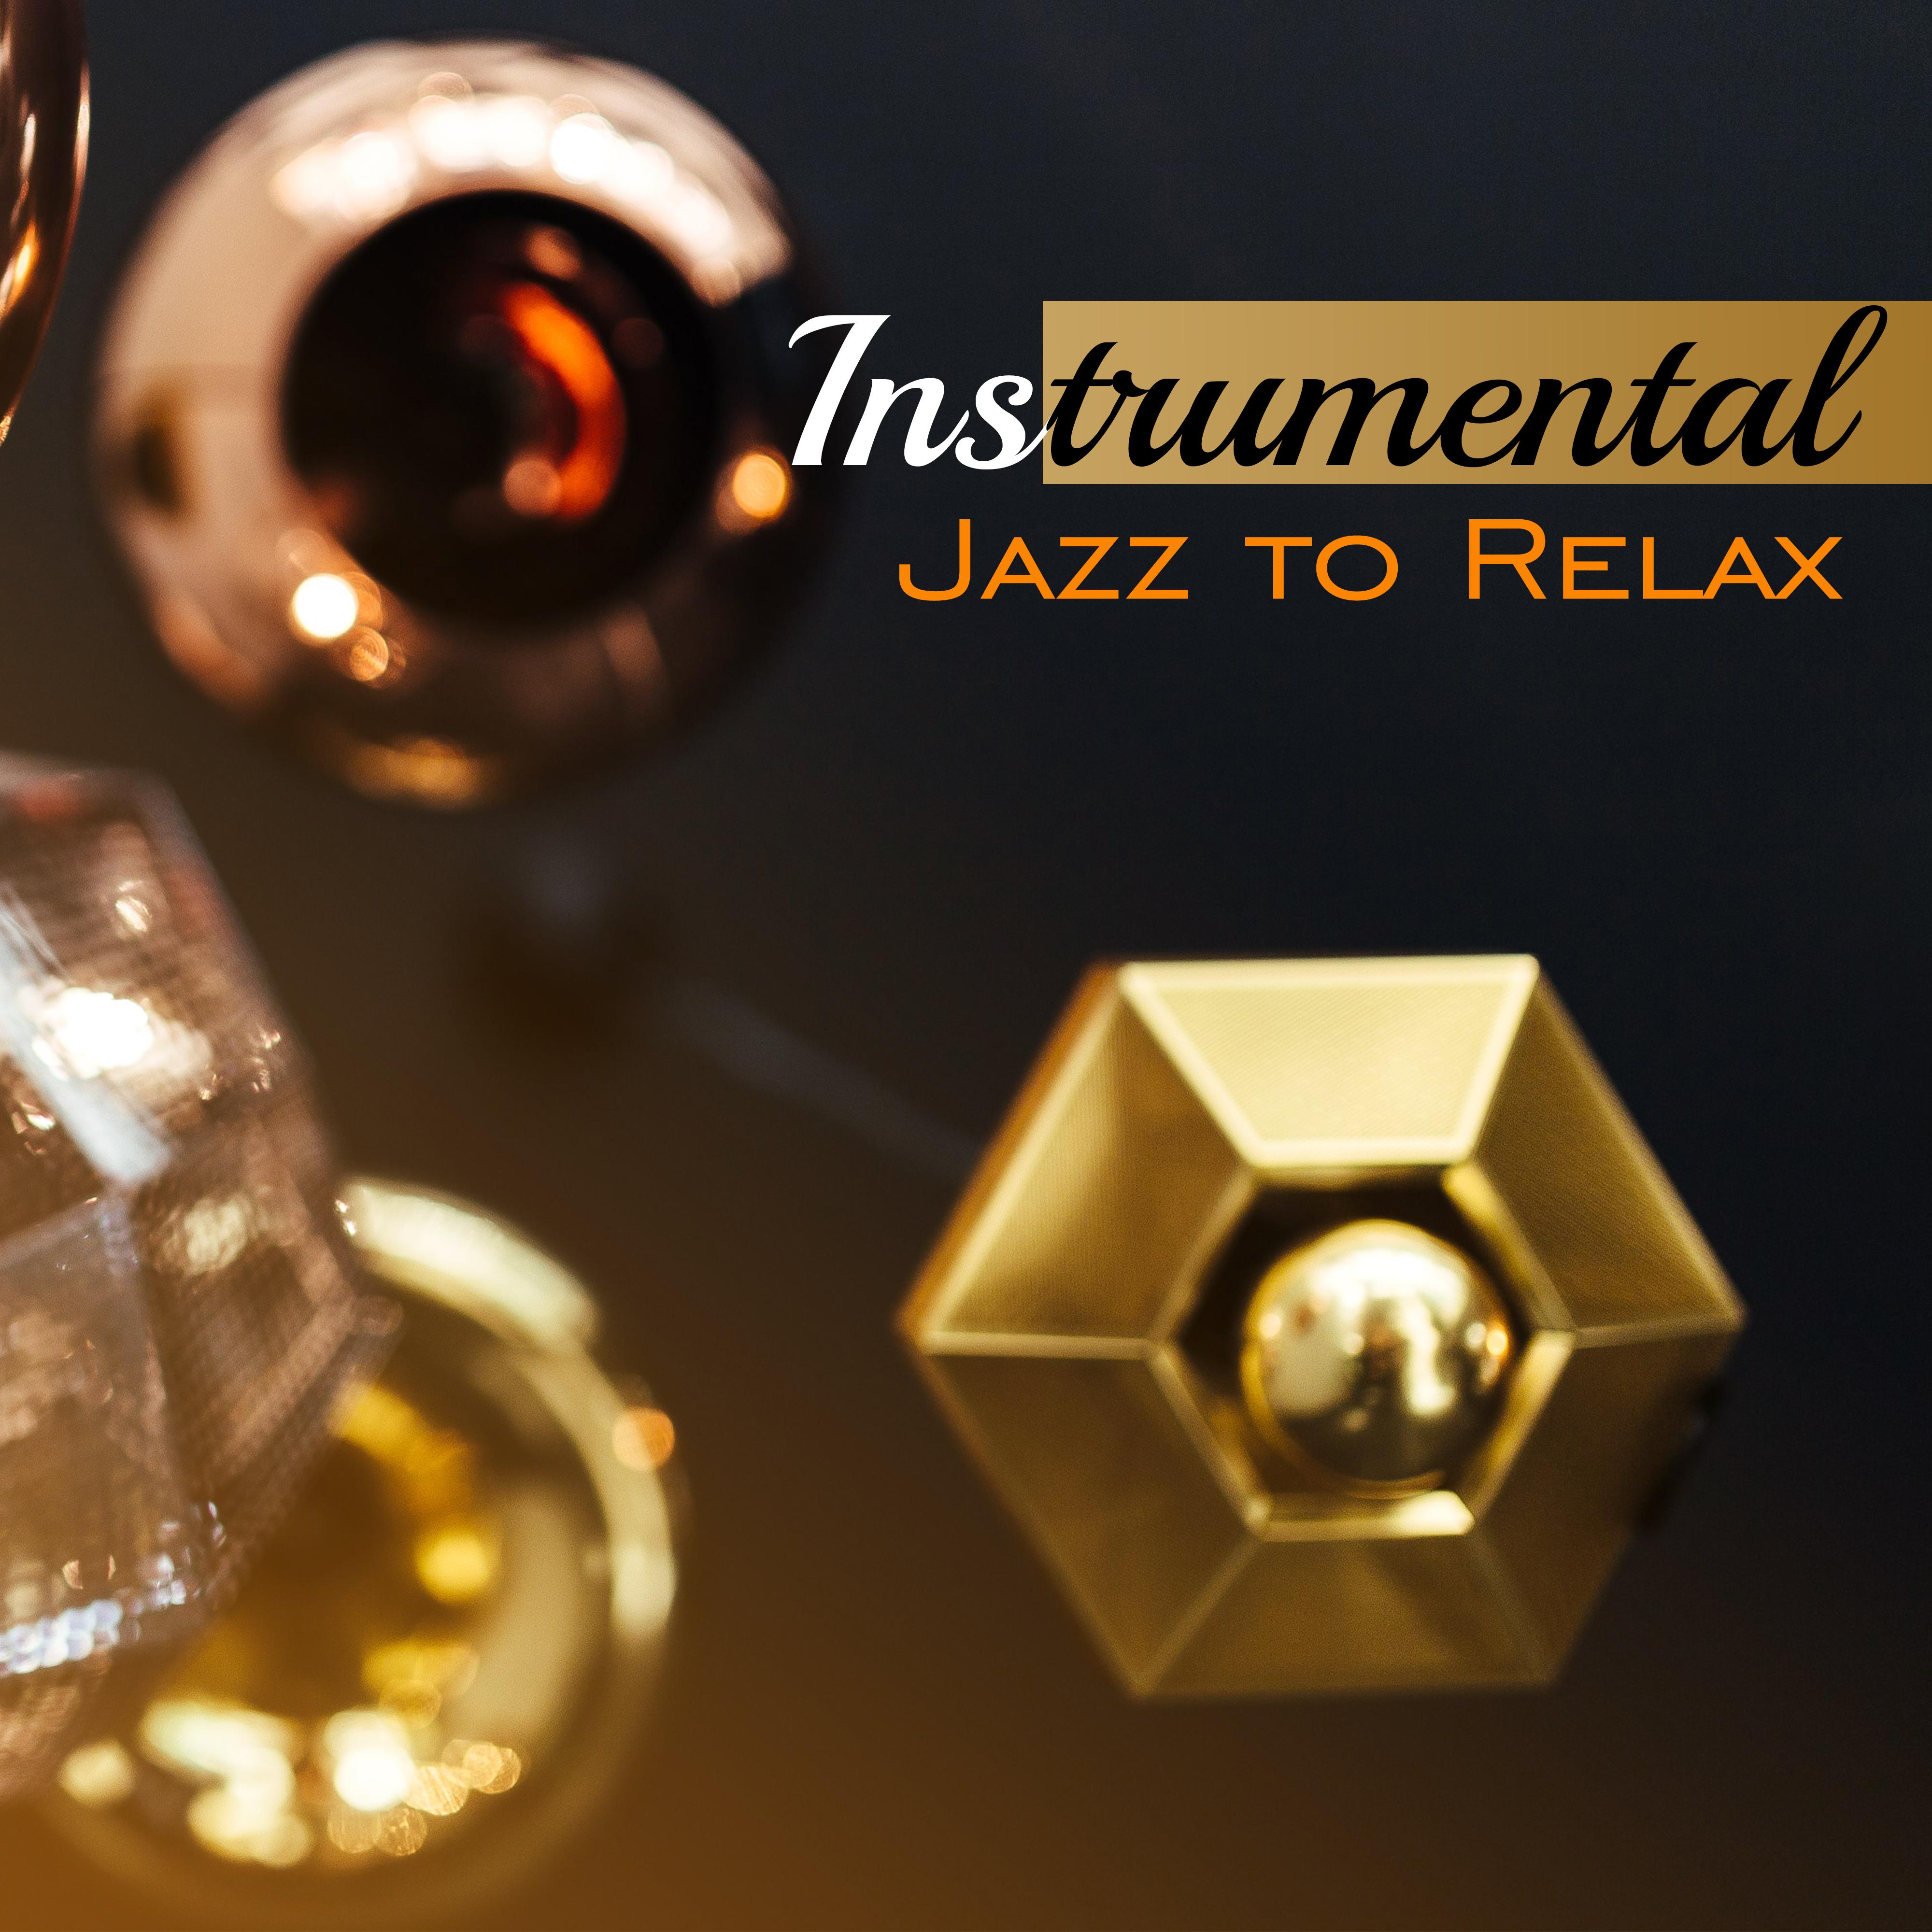 Instrumental Jazz to Relax  Mellow Music, Sensual Beats, Stress Relief, Piano Bar, Instrumental Note